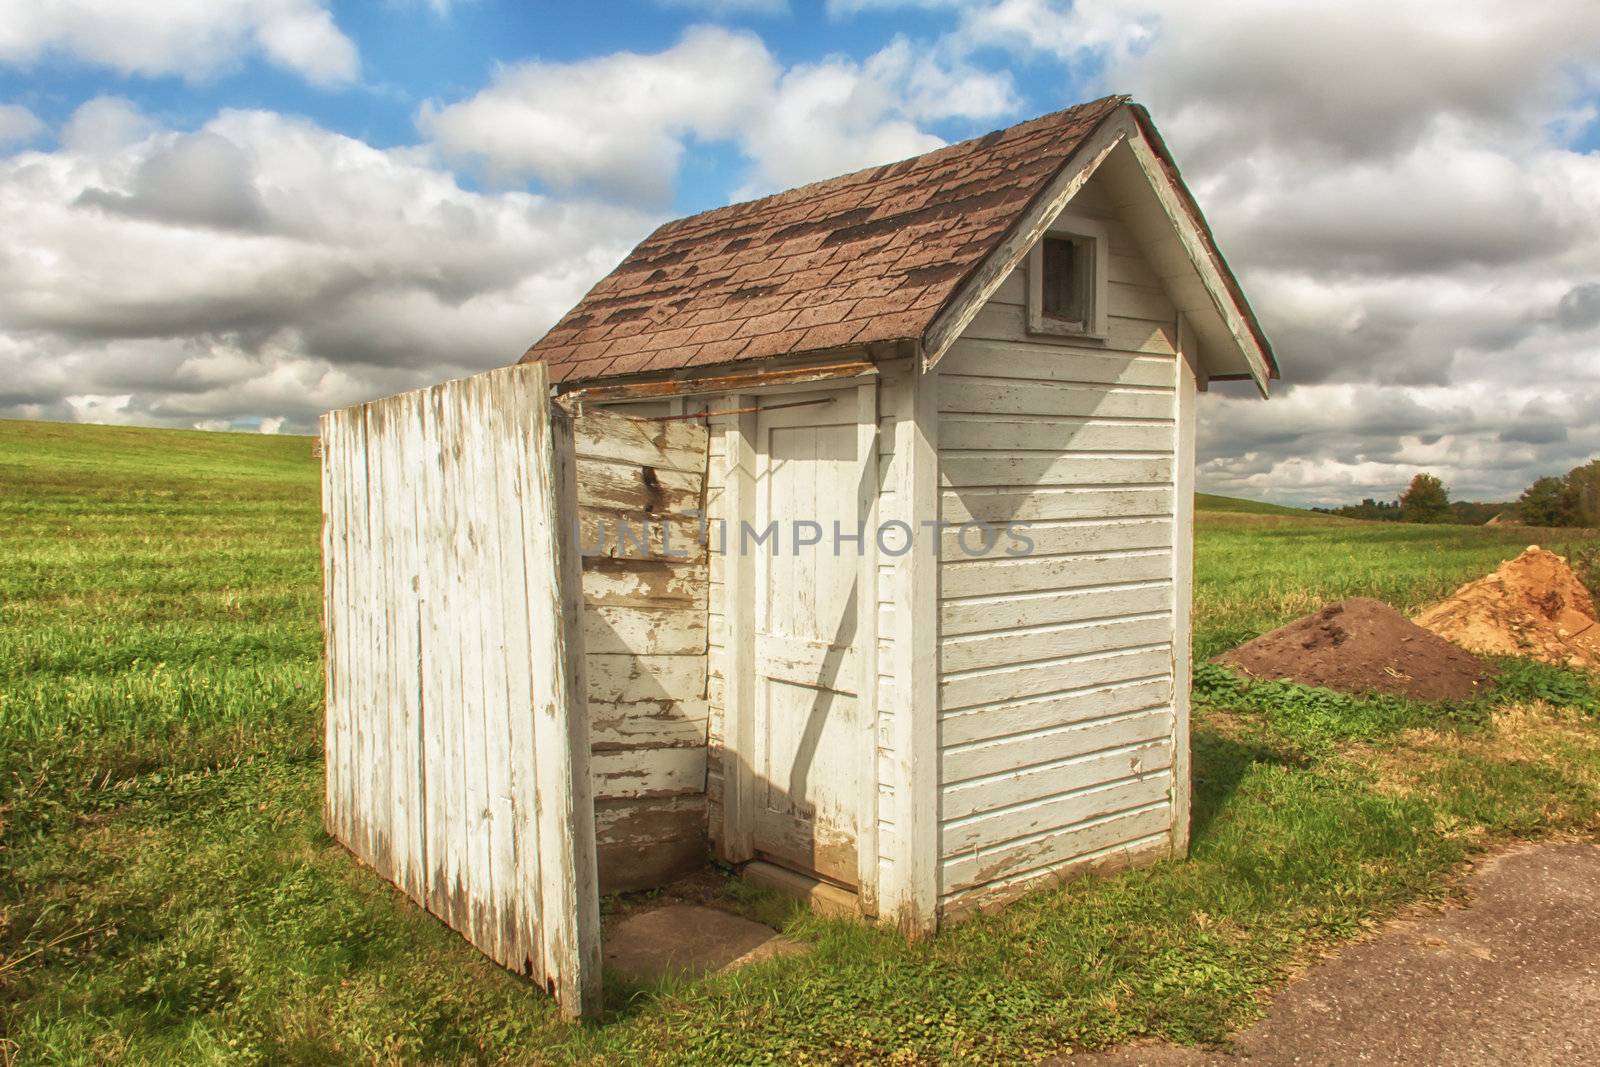 A country outhouse in Wisconsin, USA.